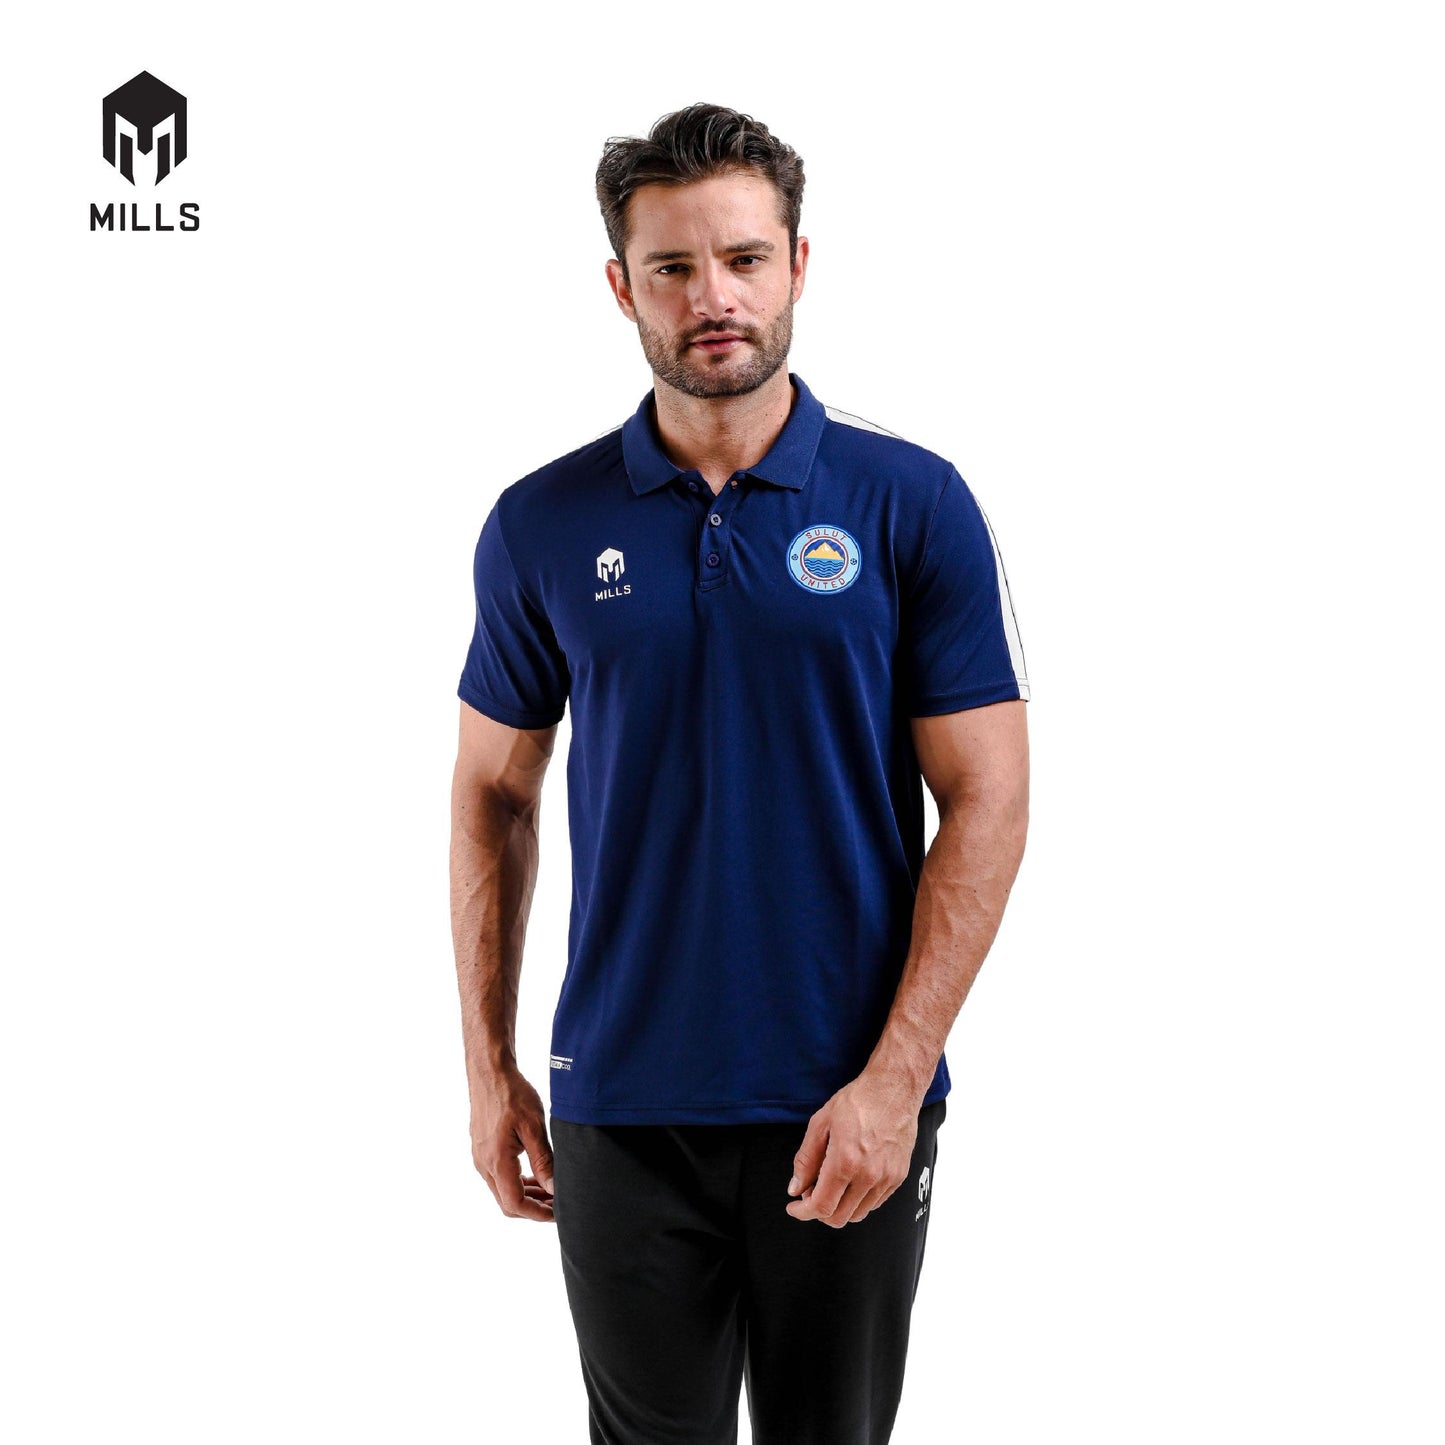 MILLS SULUT UNITED FC Polo Shirt 17032SUFC